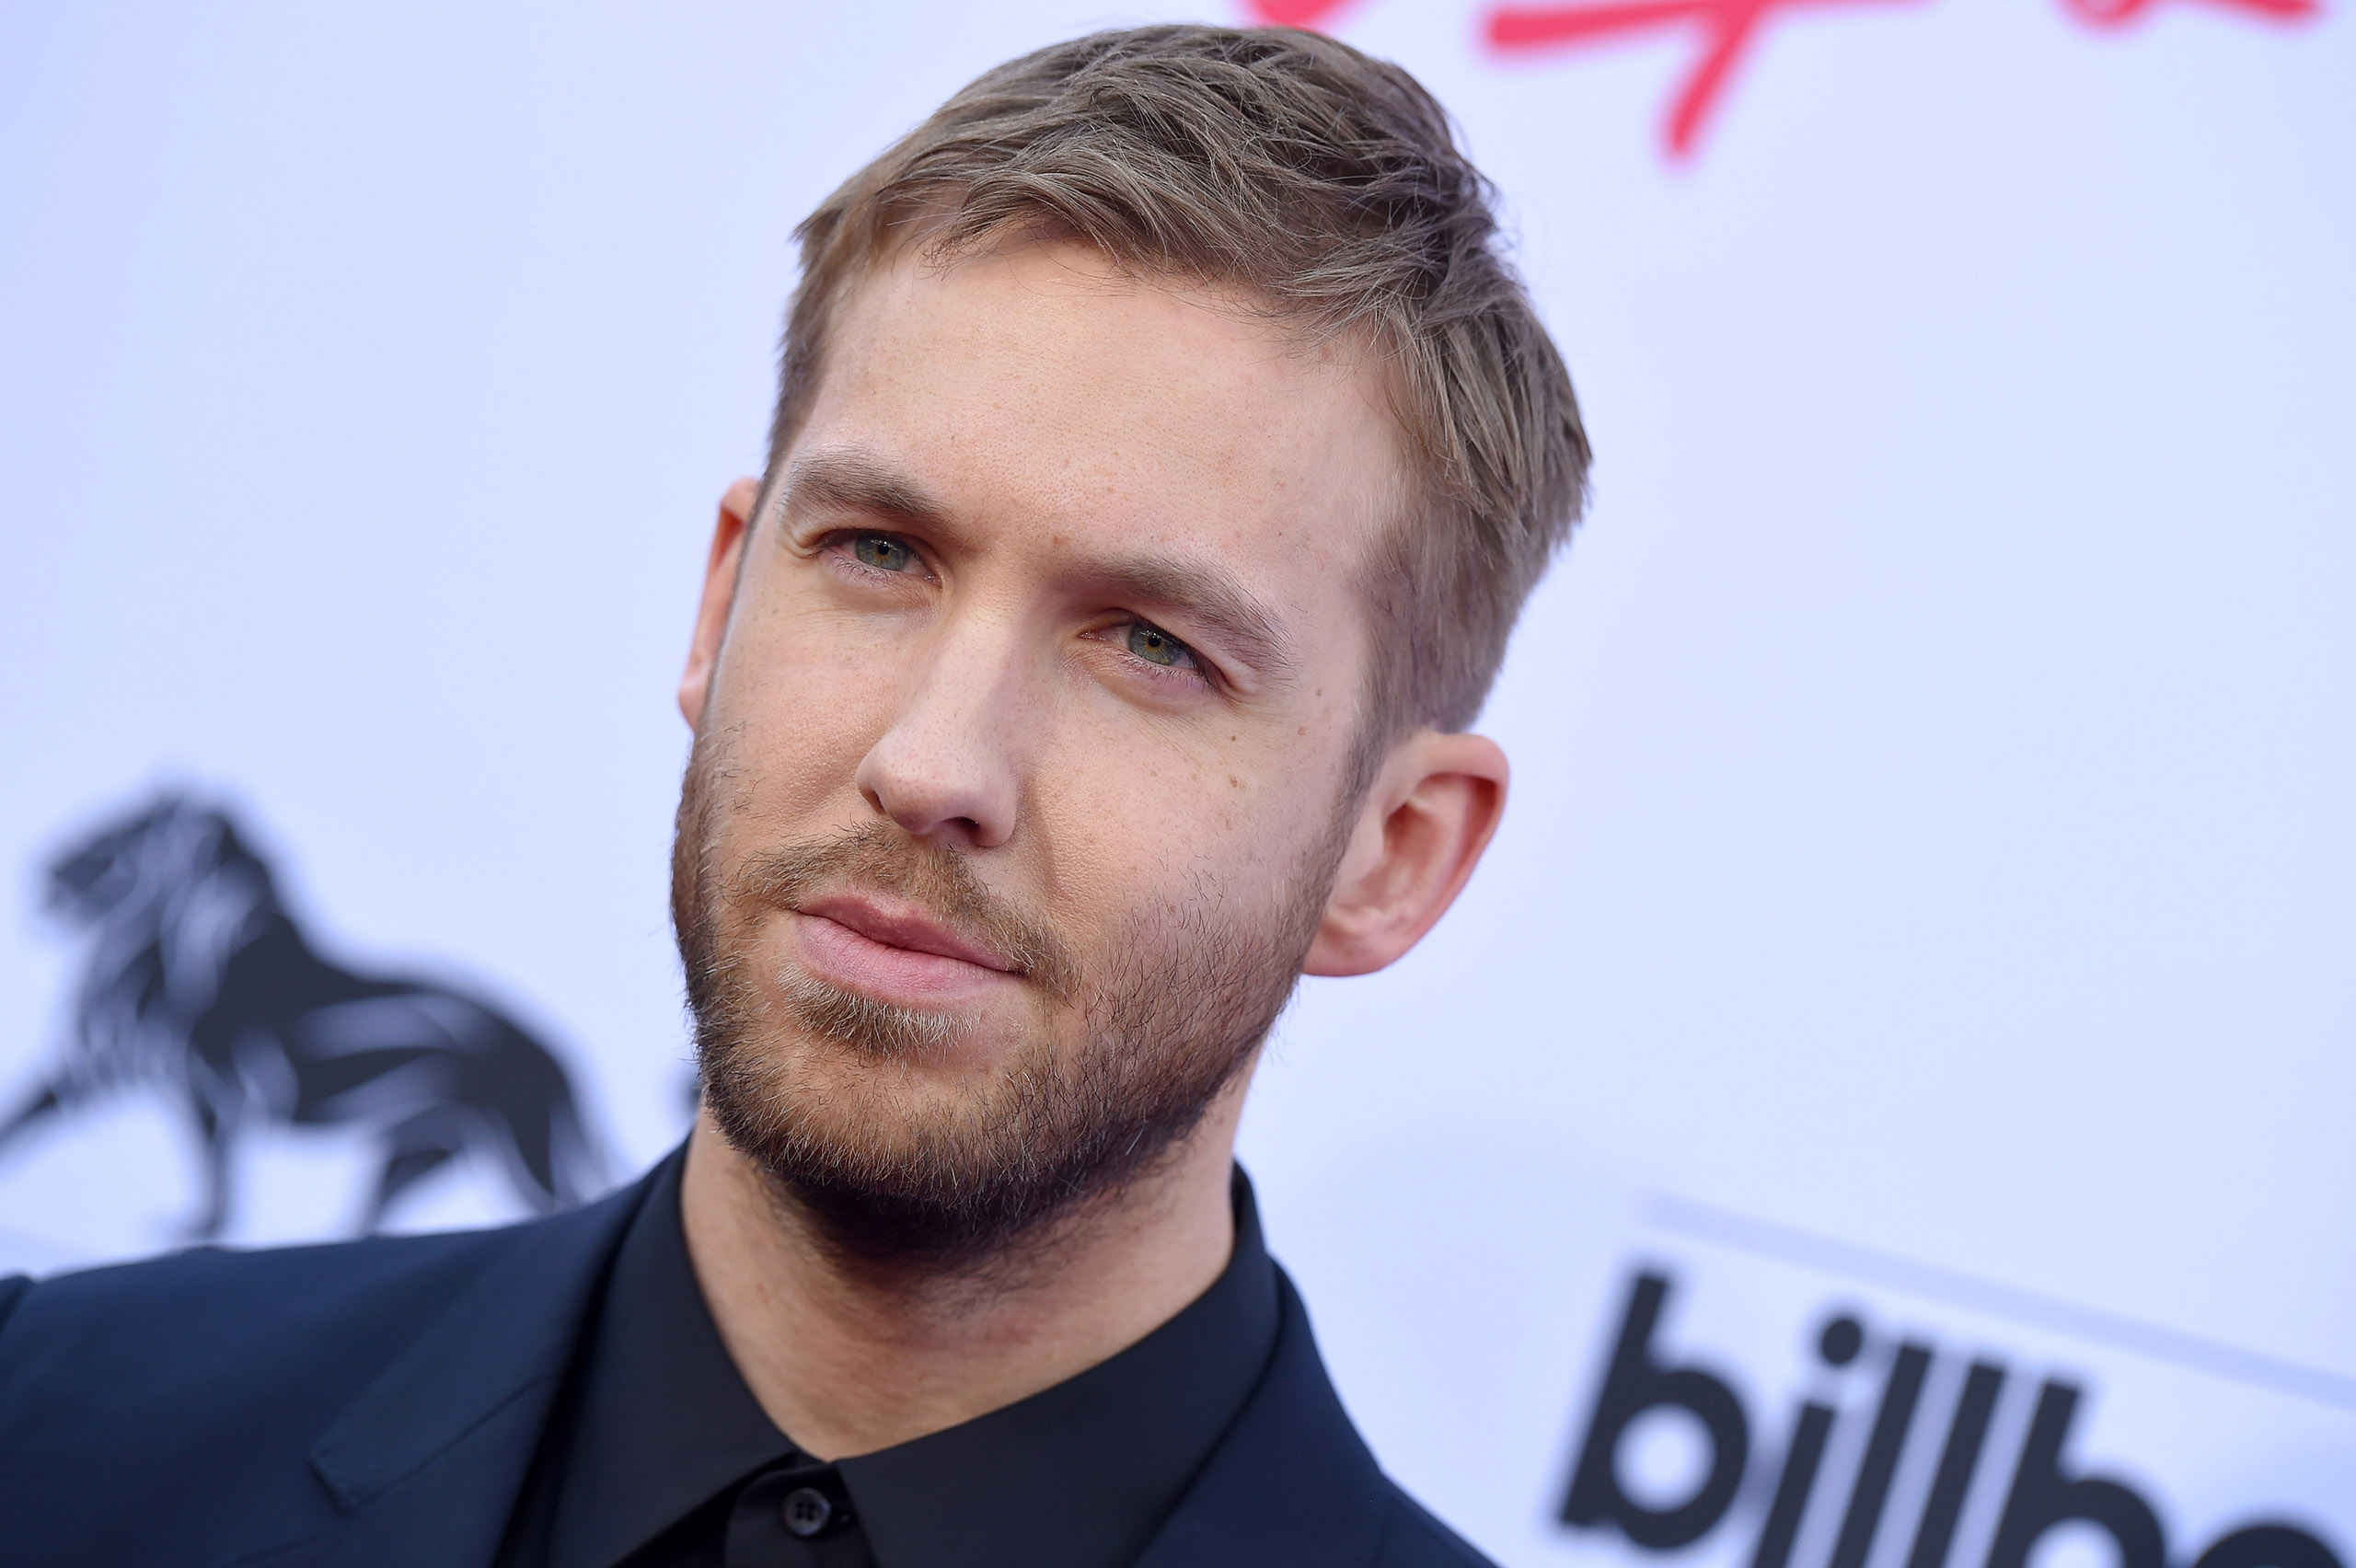 DJ Calvin Harris arrives at the 2015 Billboard Music Awards in Las Vegas, Nevada on May 17, 2015. (Bauer-Griffin/FilmMagic/Getty Images)